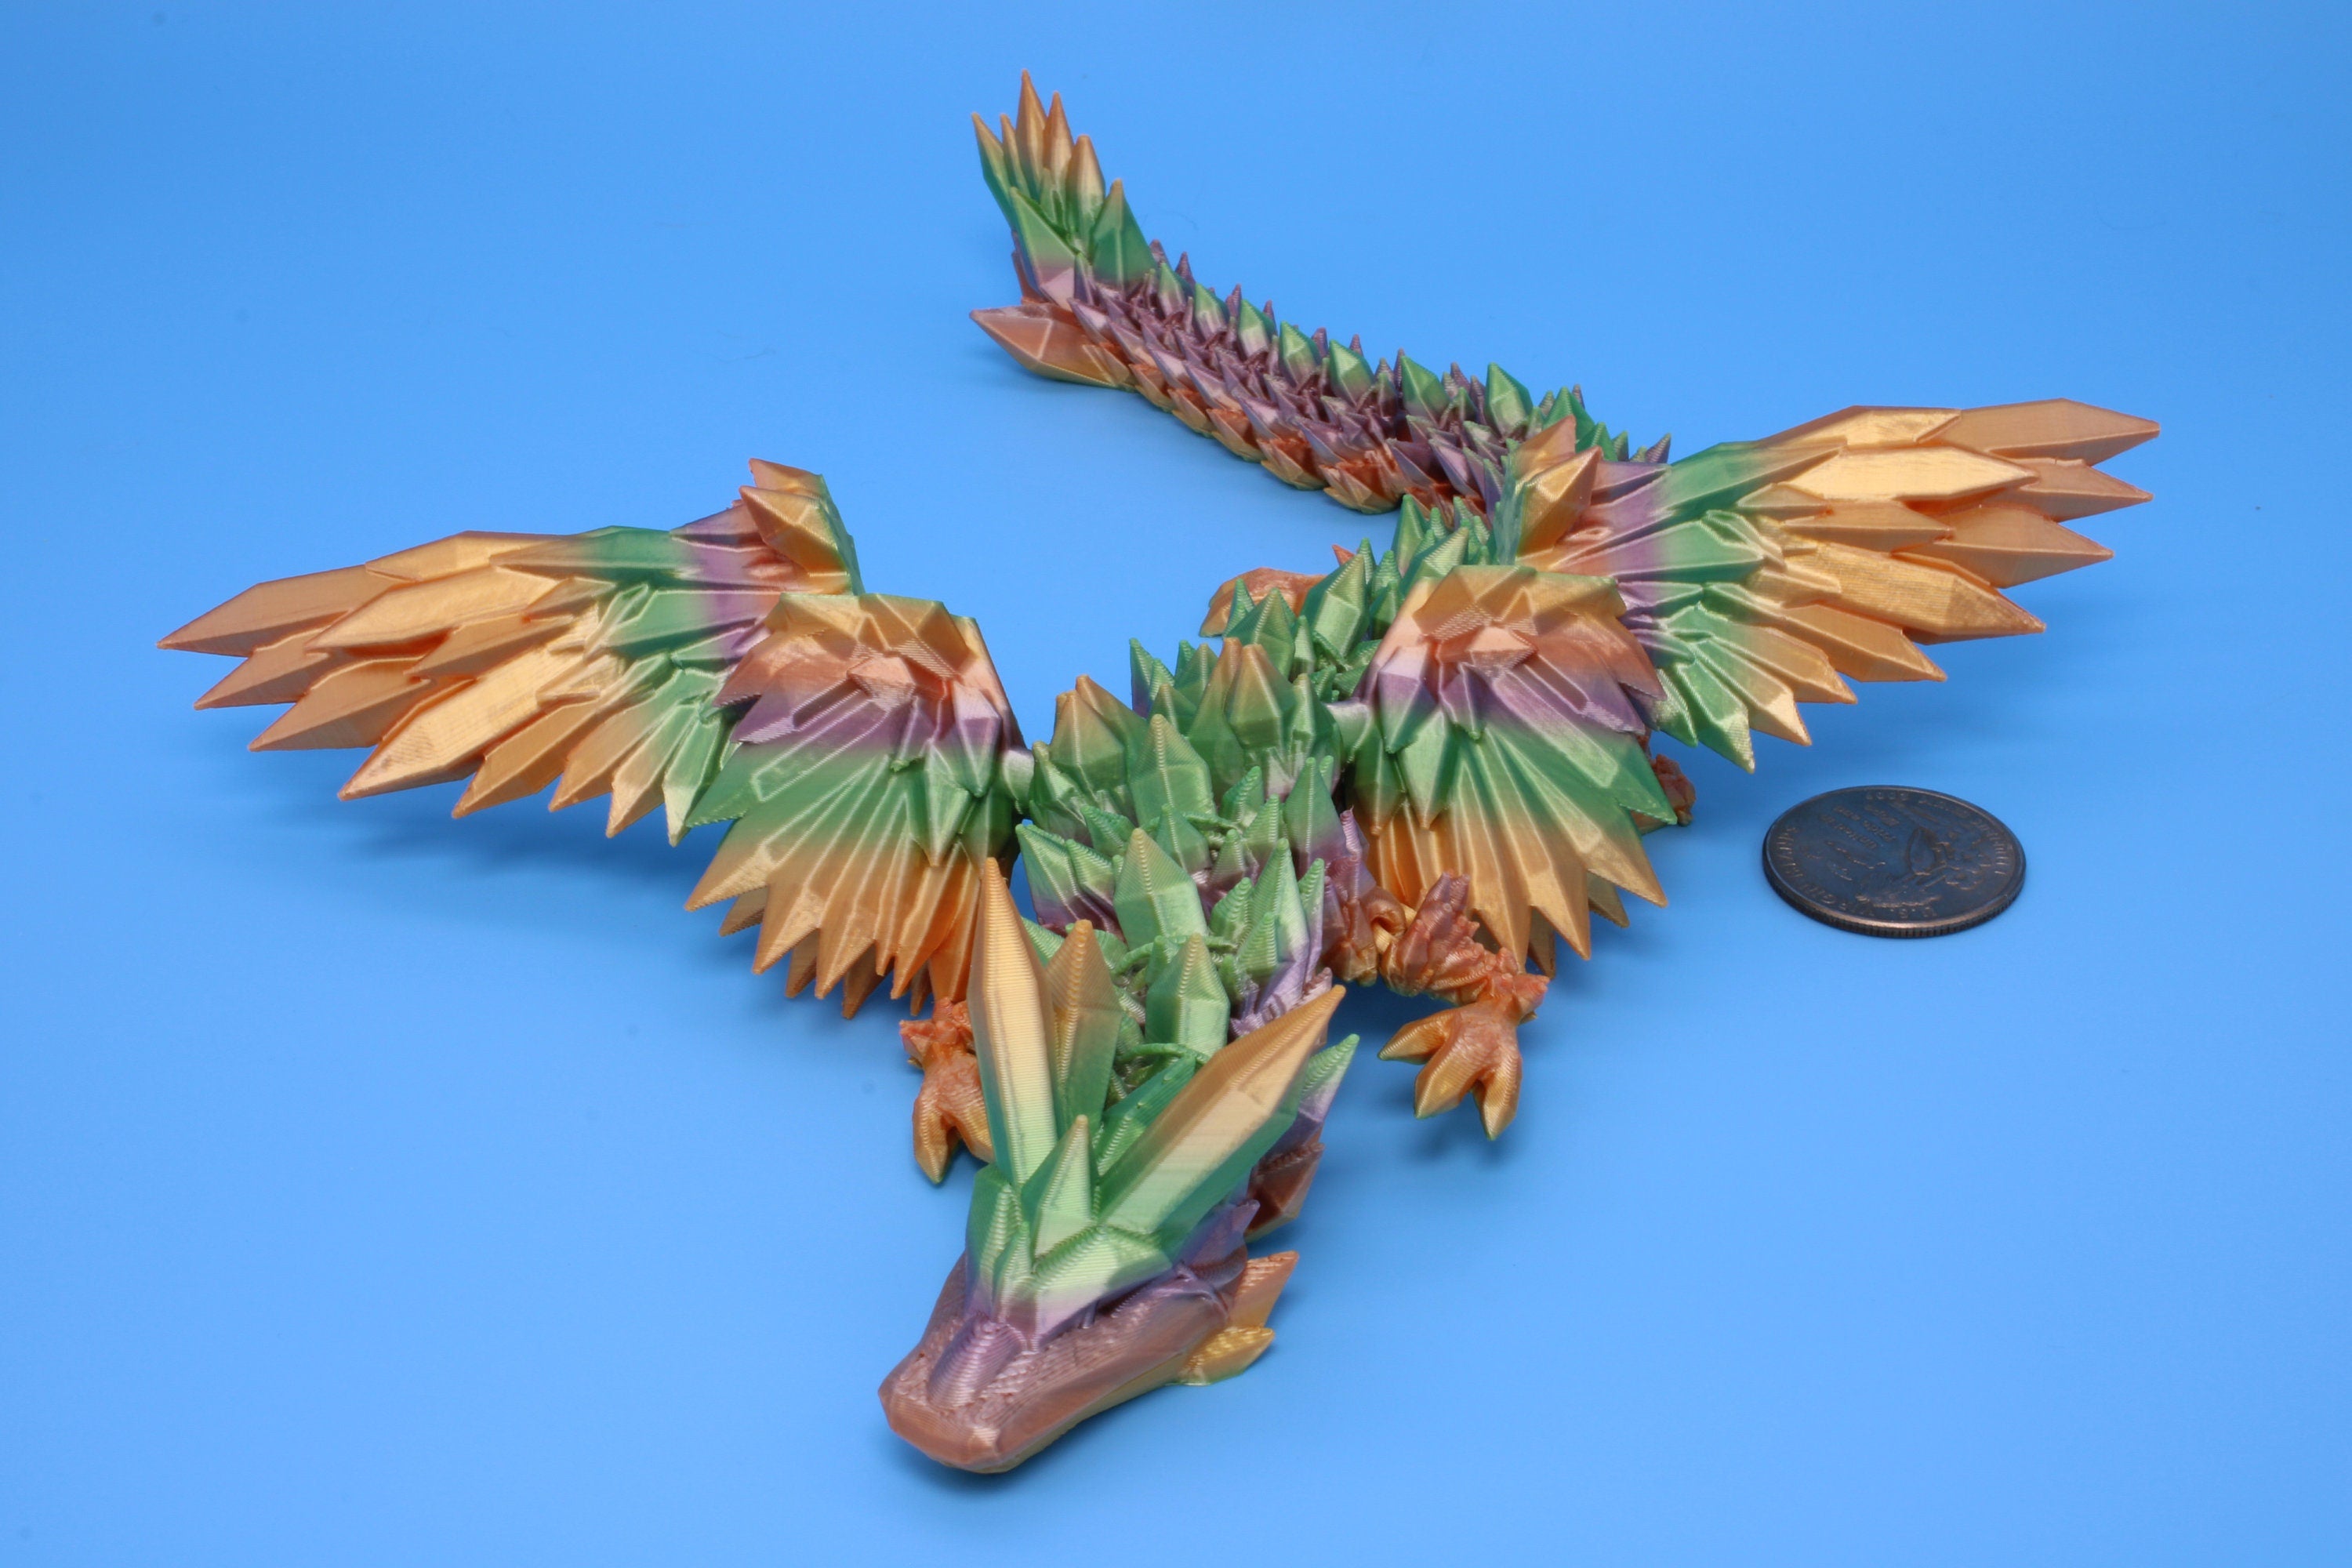 Adult Crystal Wing Dragon- Pink | Flawed | Miniature | 3D printed | Fidget Toy | 10.5in.